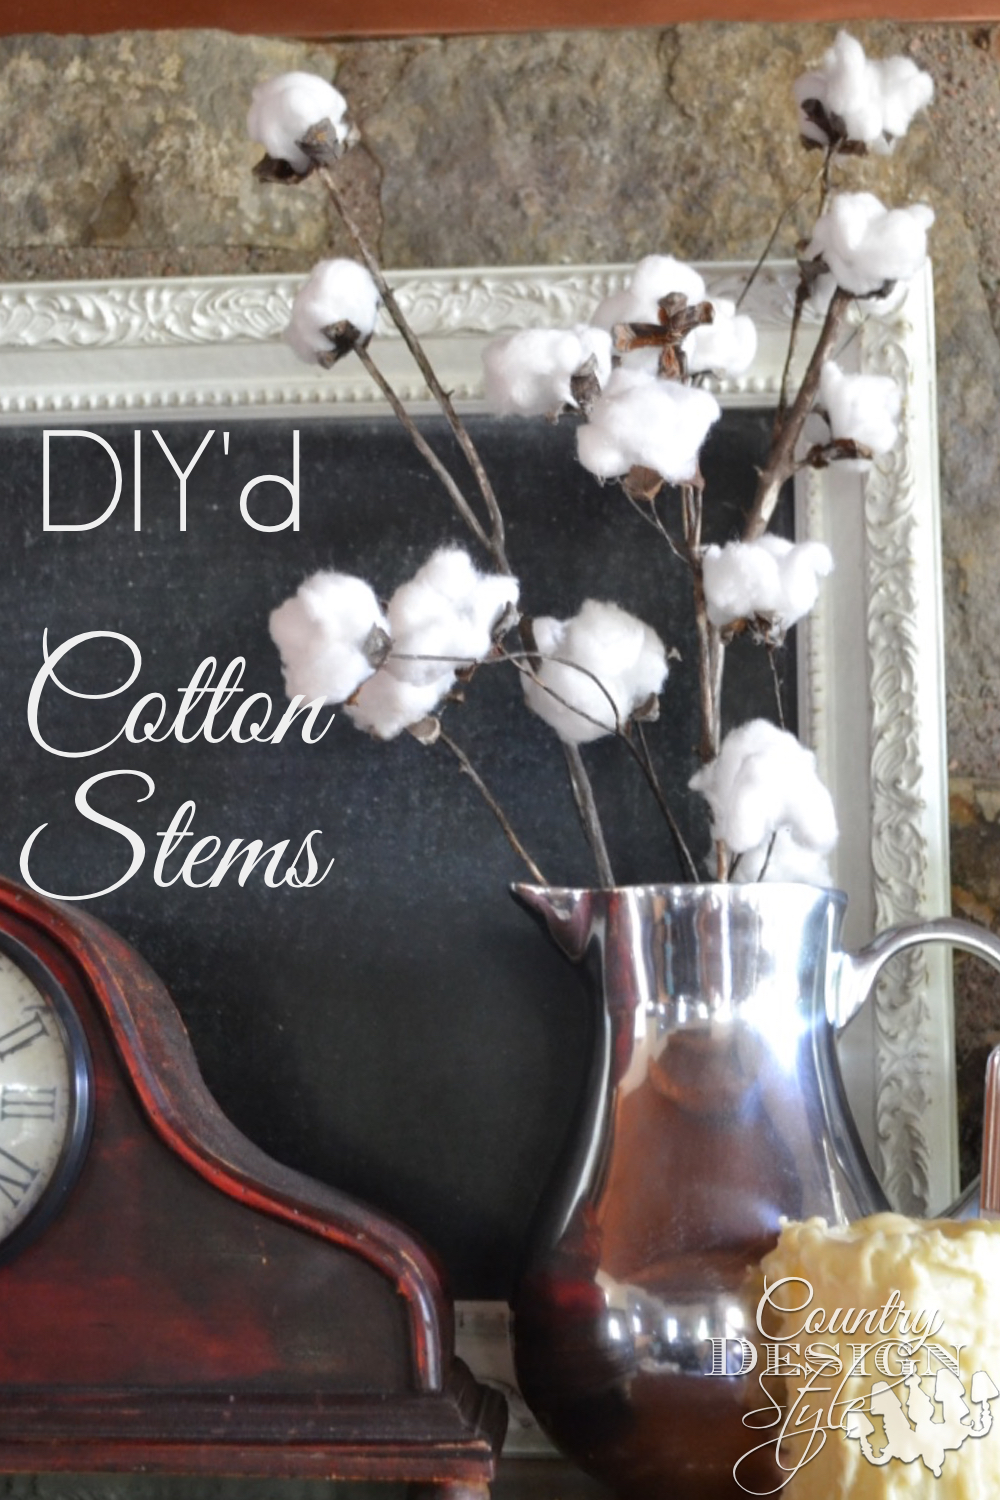 Easy to make your own cotton stems using cotton balls and items found outside. Country Design Style www.countrydesignstyle.com